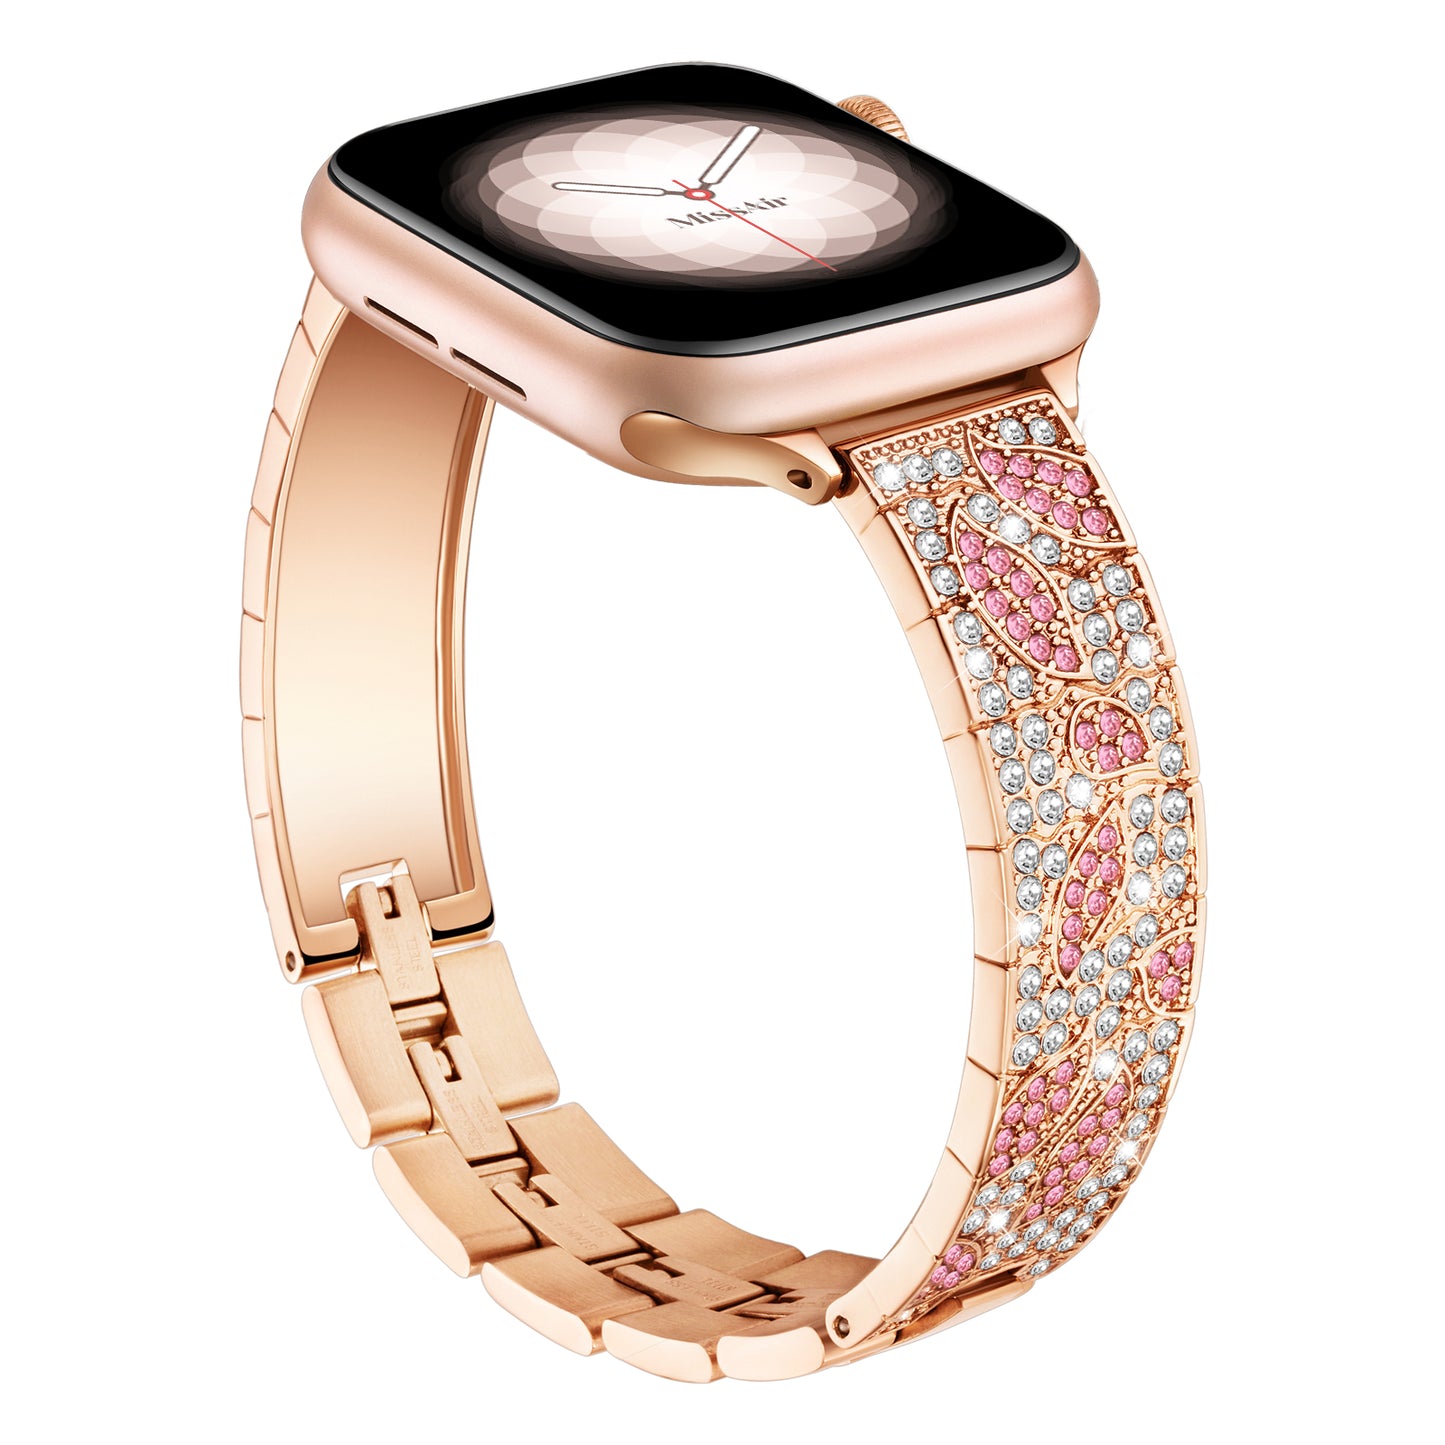 Autumn Leaves Bling Band for Apple Watch